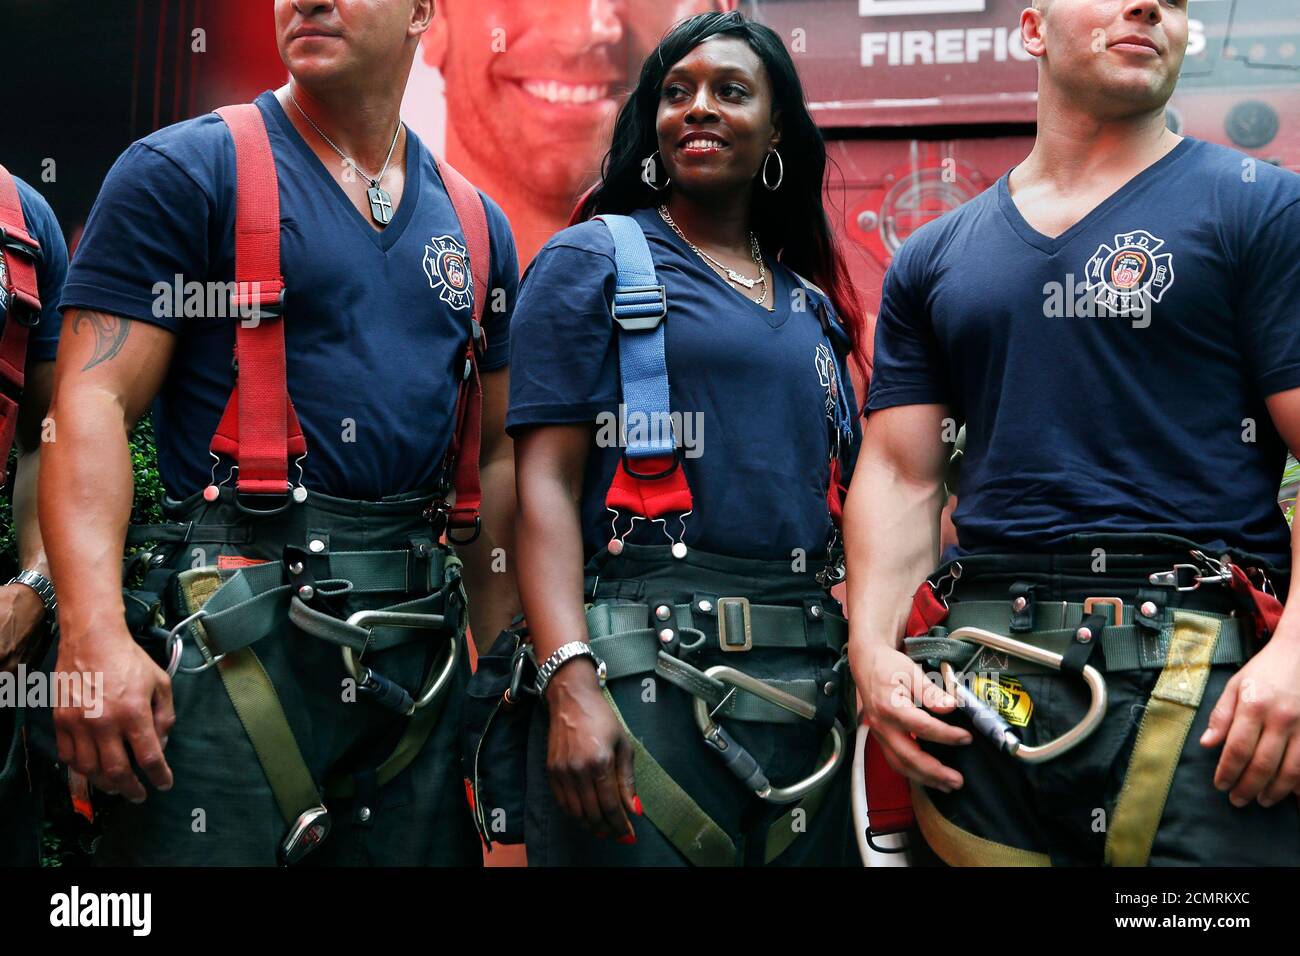 Fire Department of New York's (FDNY) firefighter Danae Mines (C), a 11-year  veteran of Engine Co. 60 in the South Bronx, stands with fellow  firefighters during a promotional signing of the FDNY